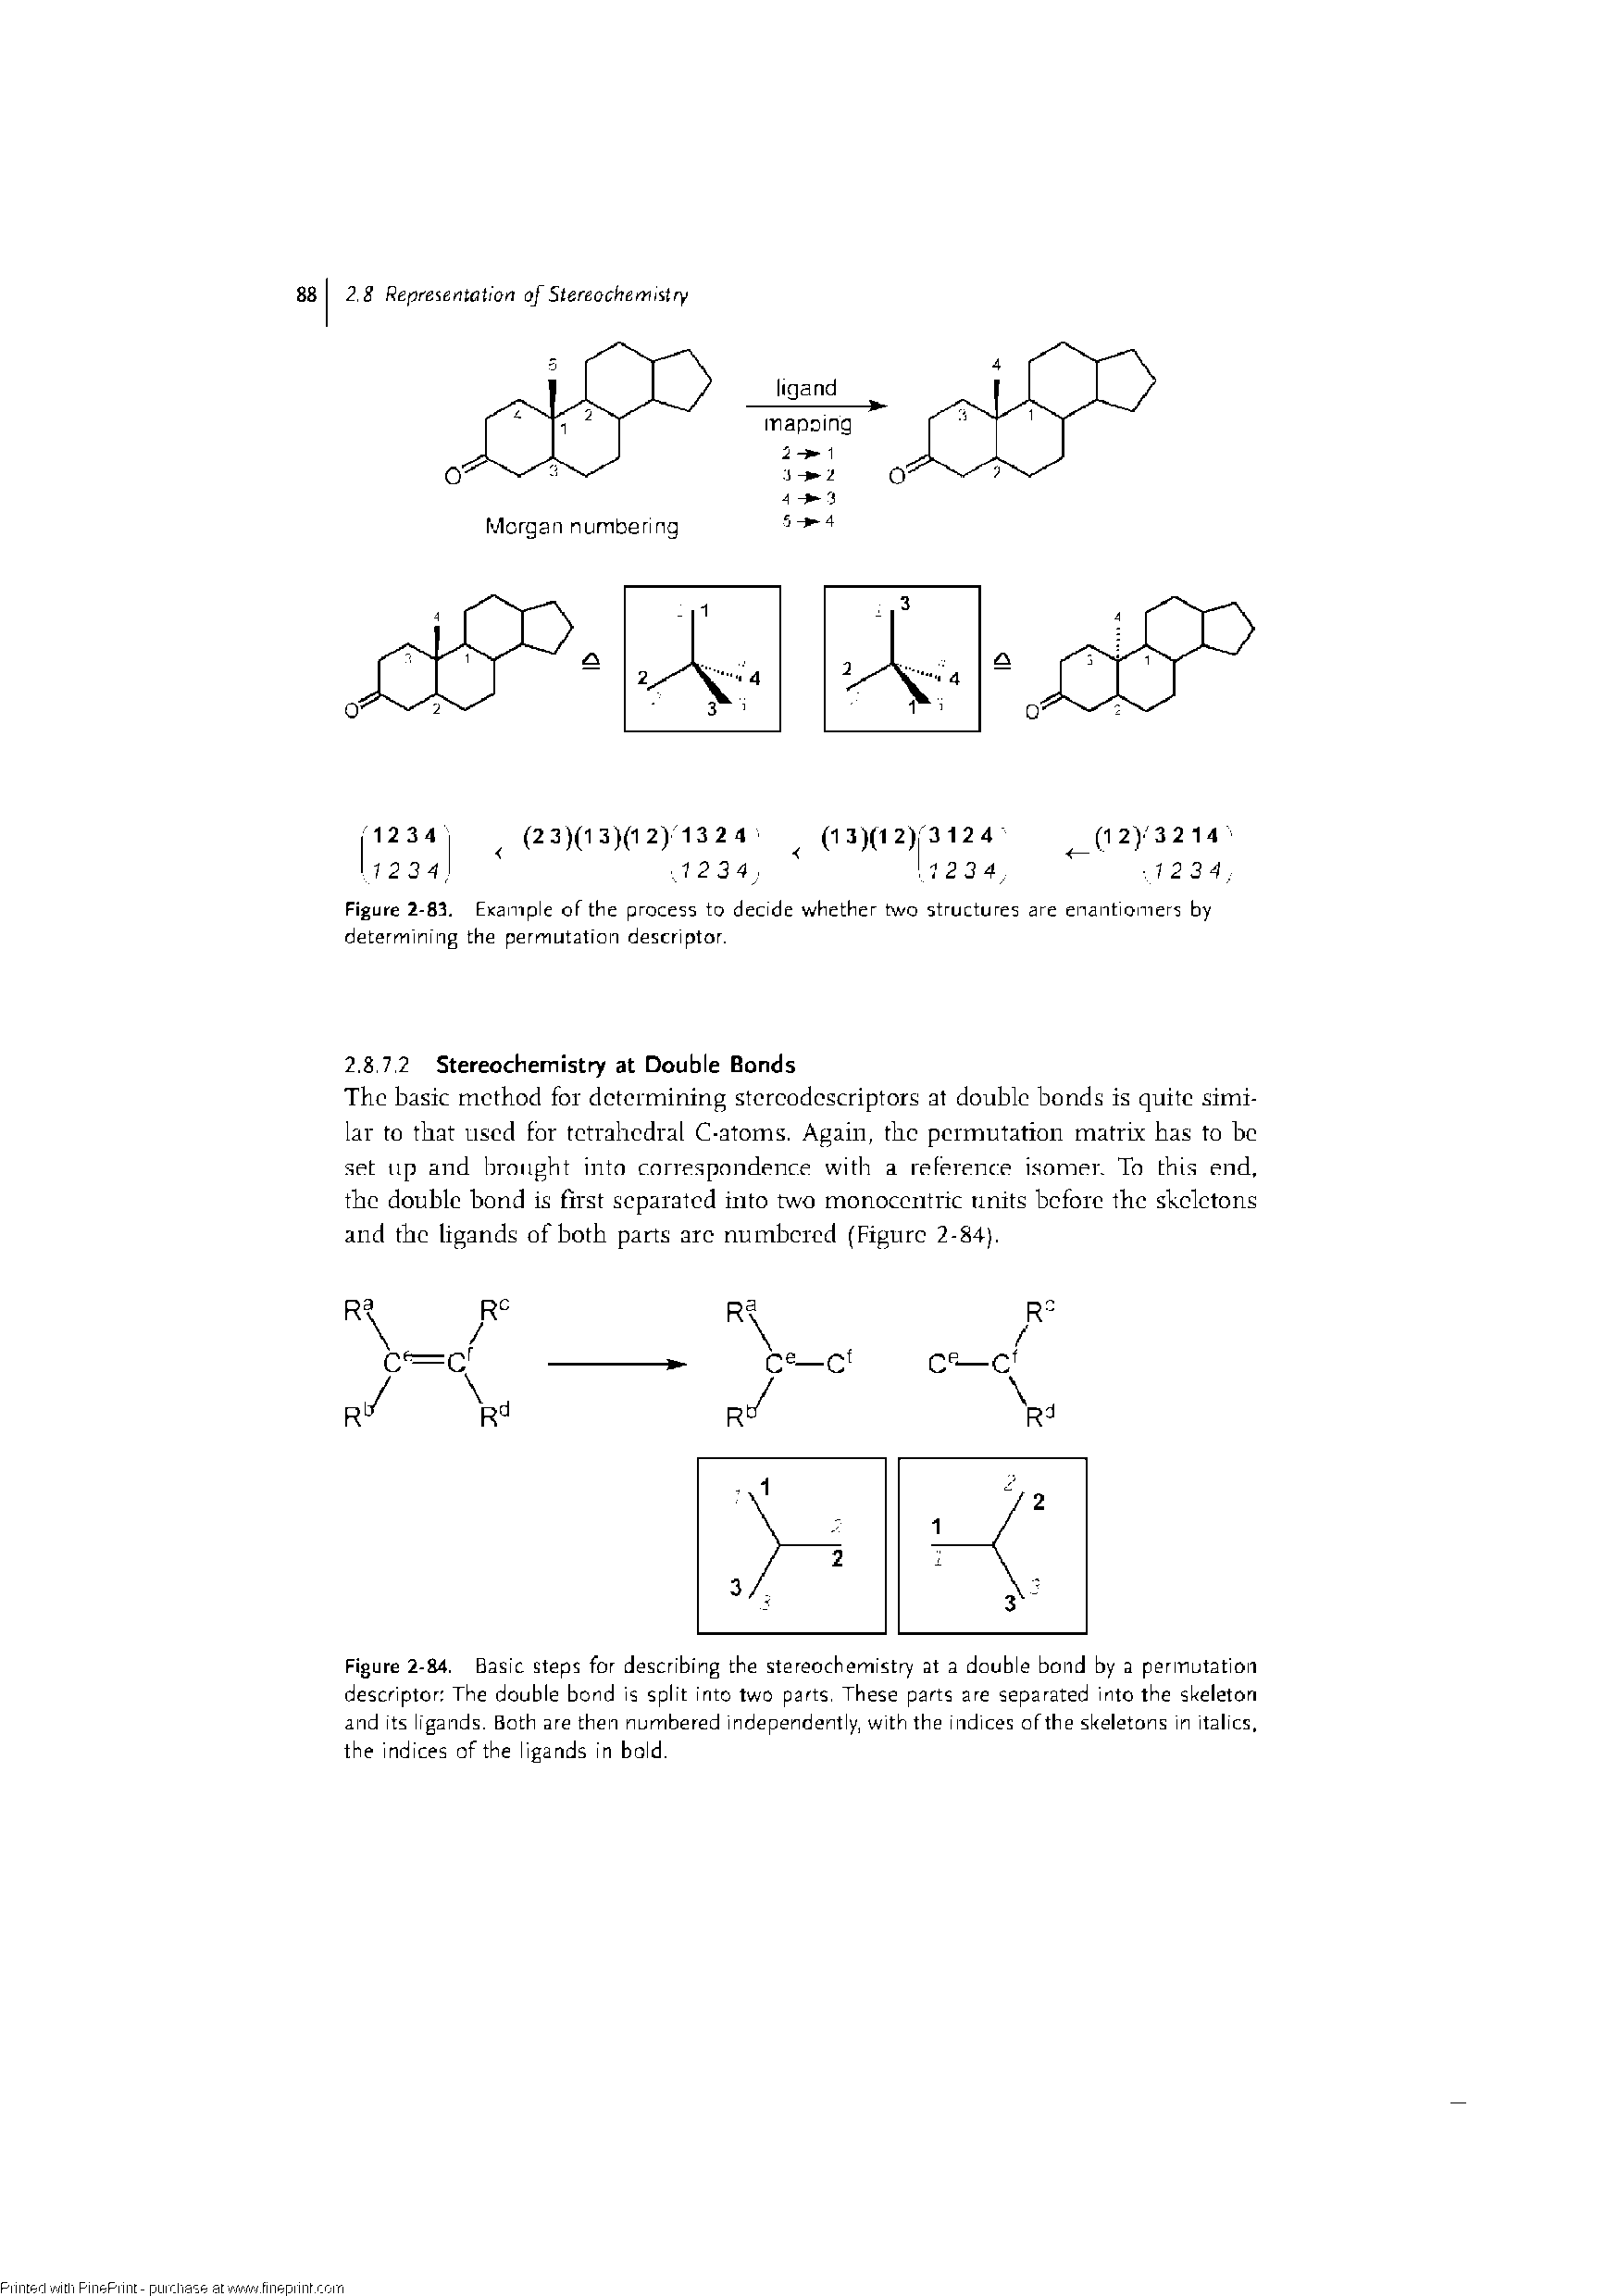 Figure 2-83. EKample of the process to decide whether two structures are enantiomers by determining the permutation descriptor.